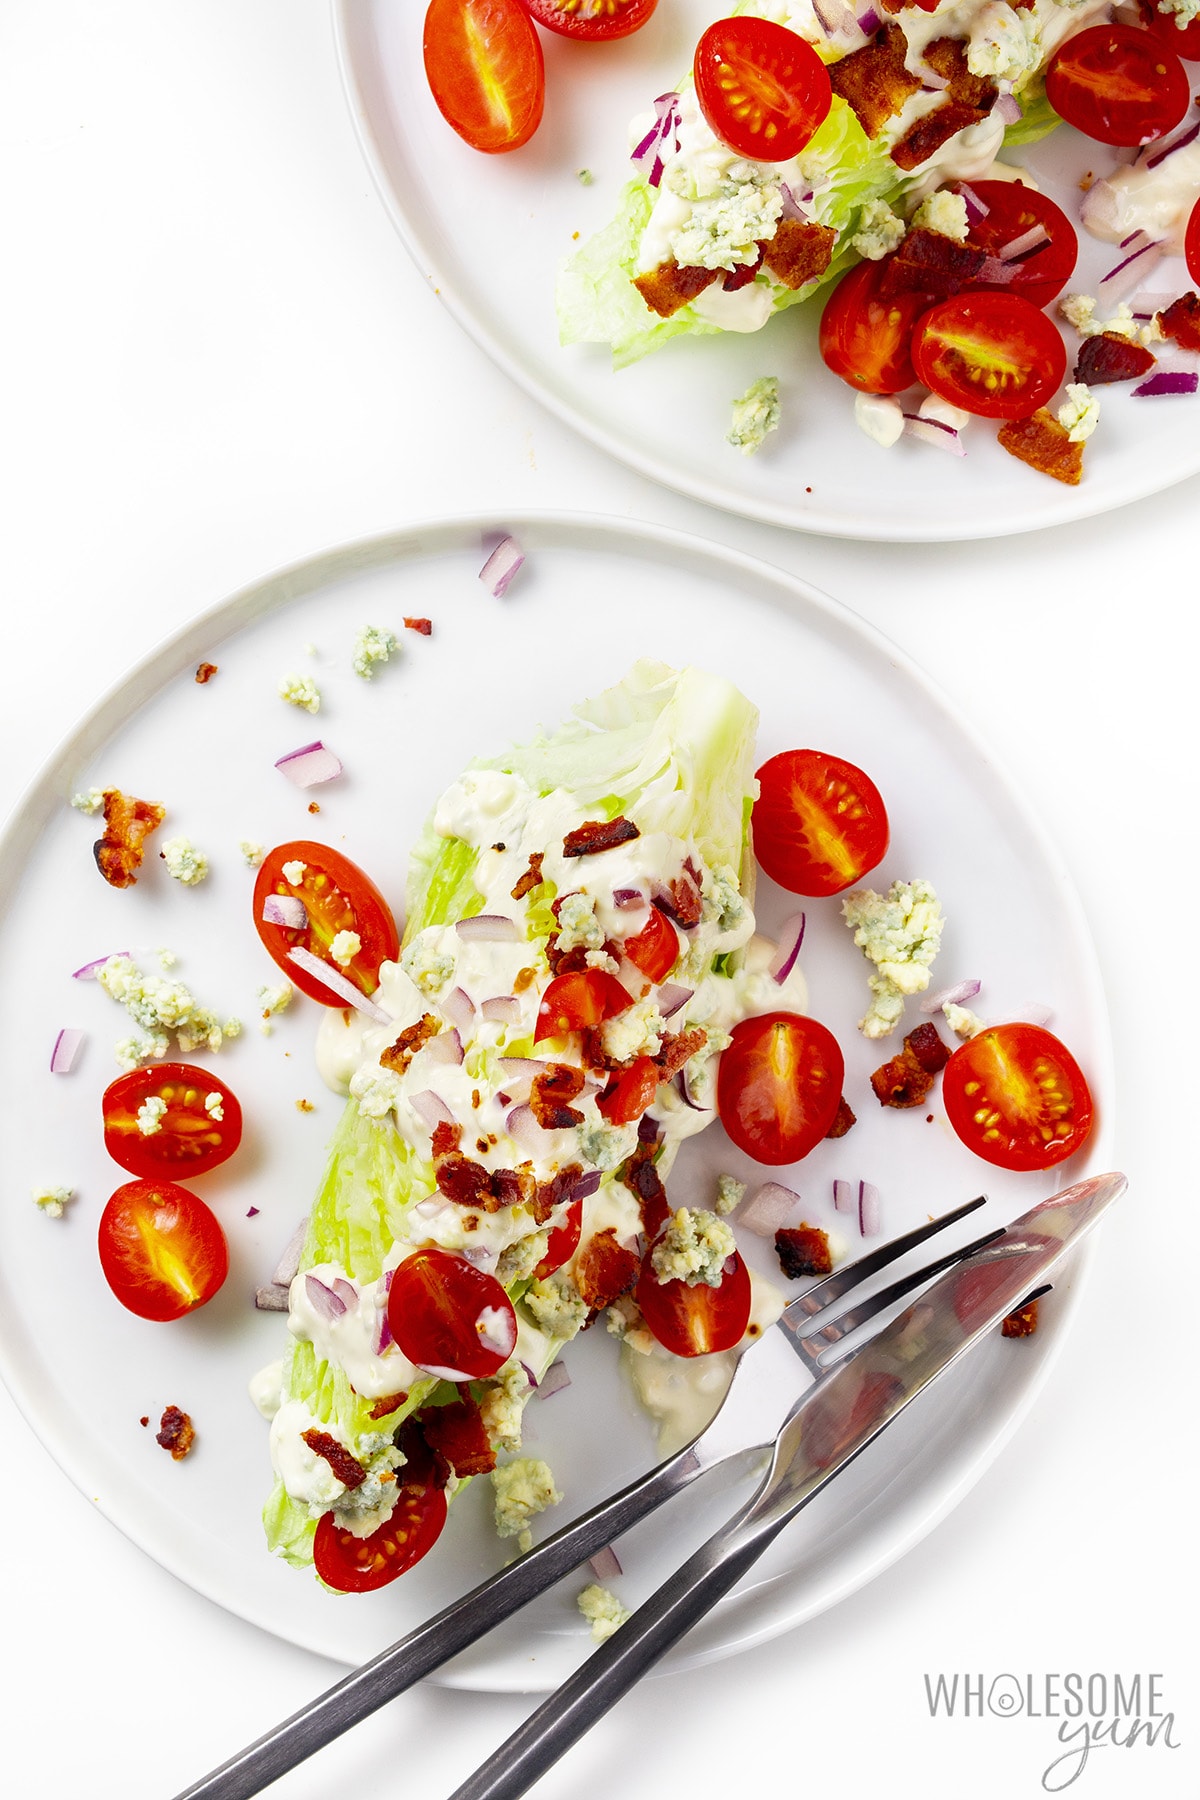 Wedge salads on plates with fork and knife.